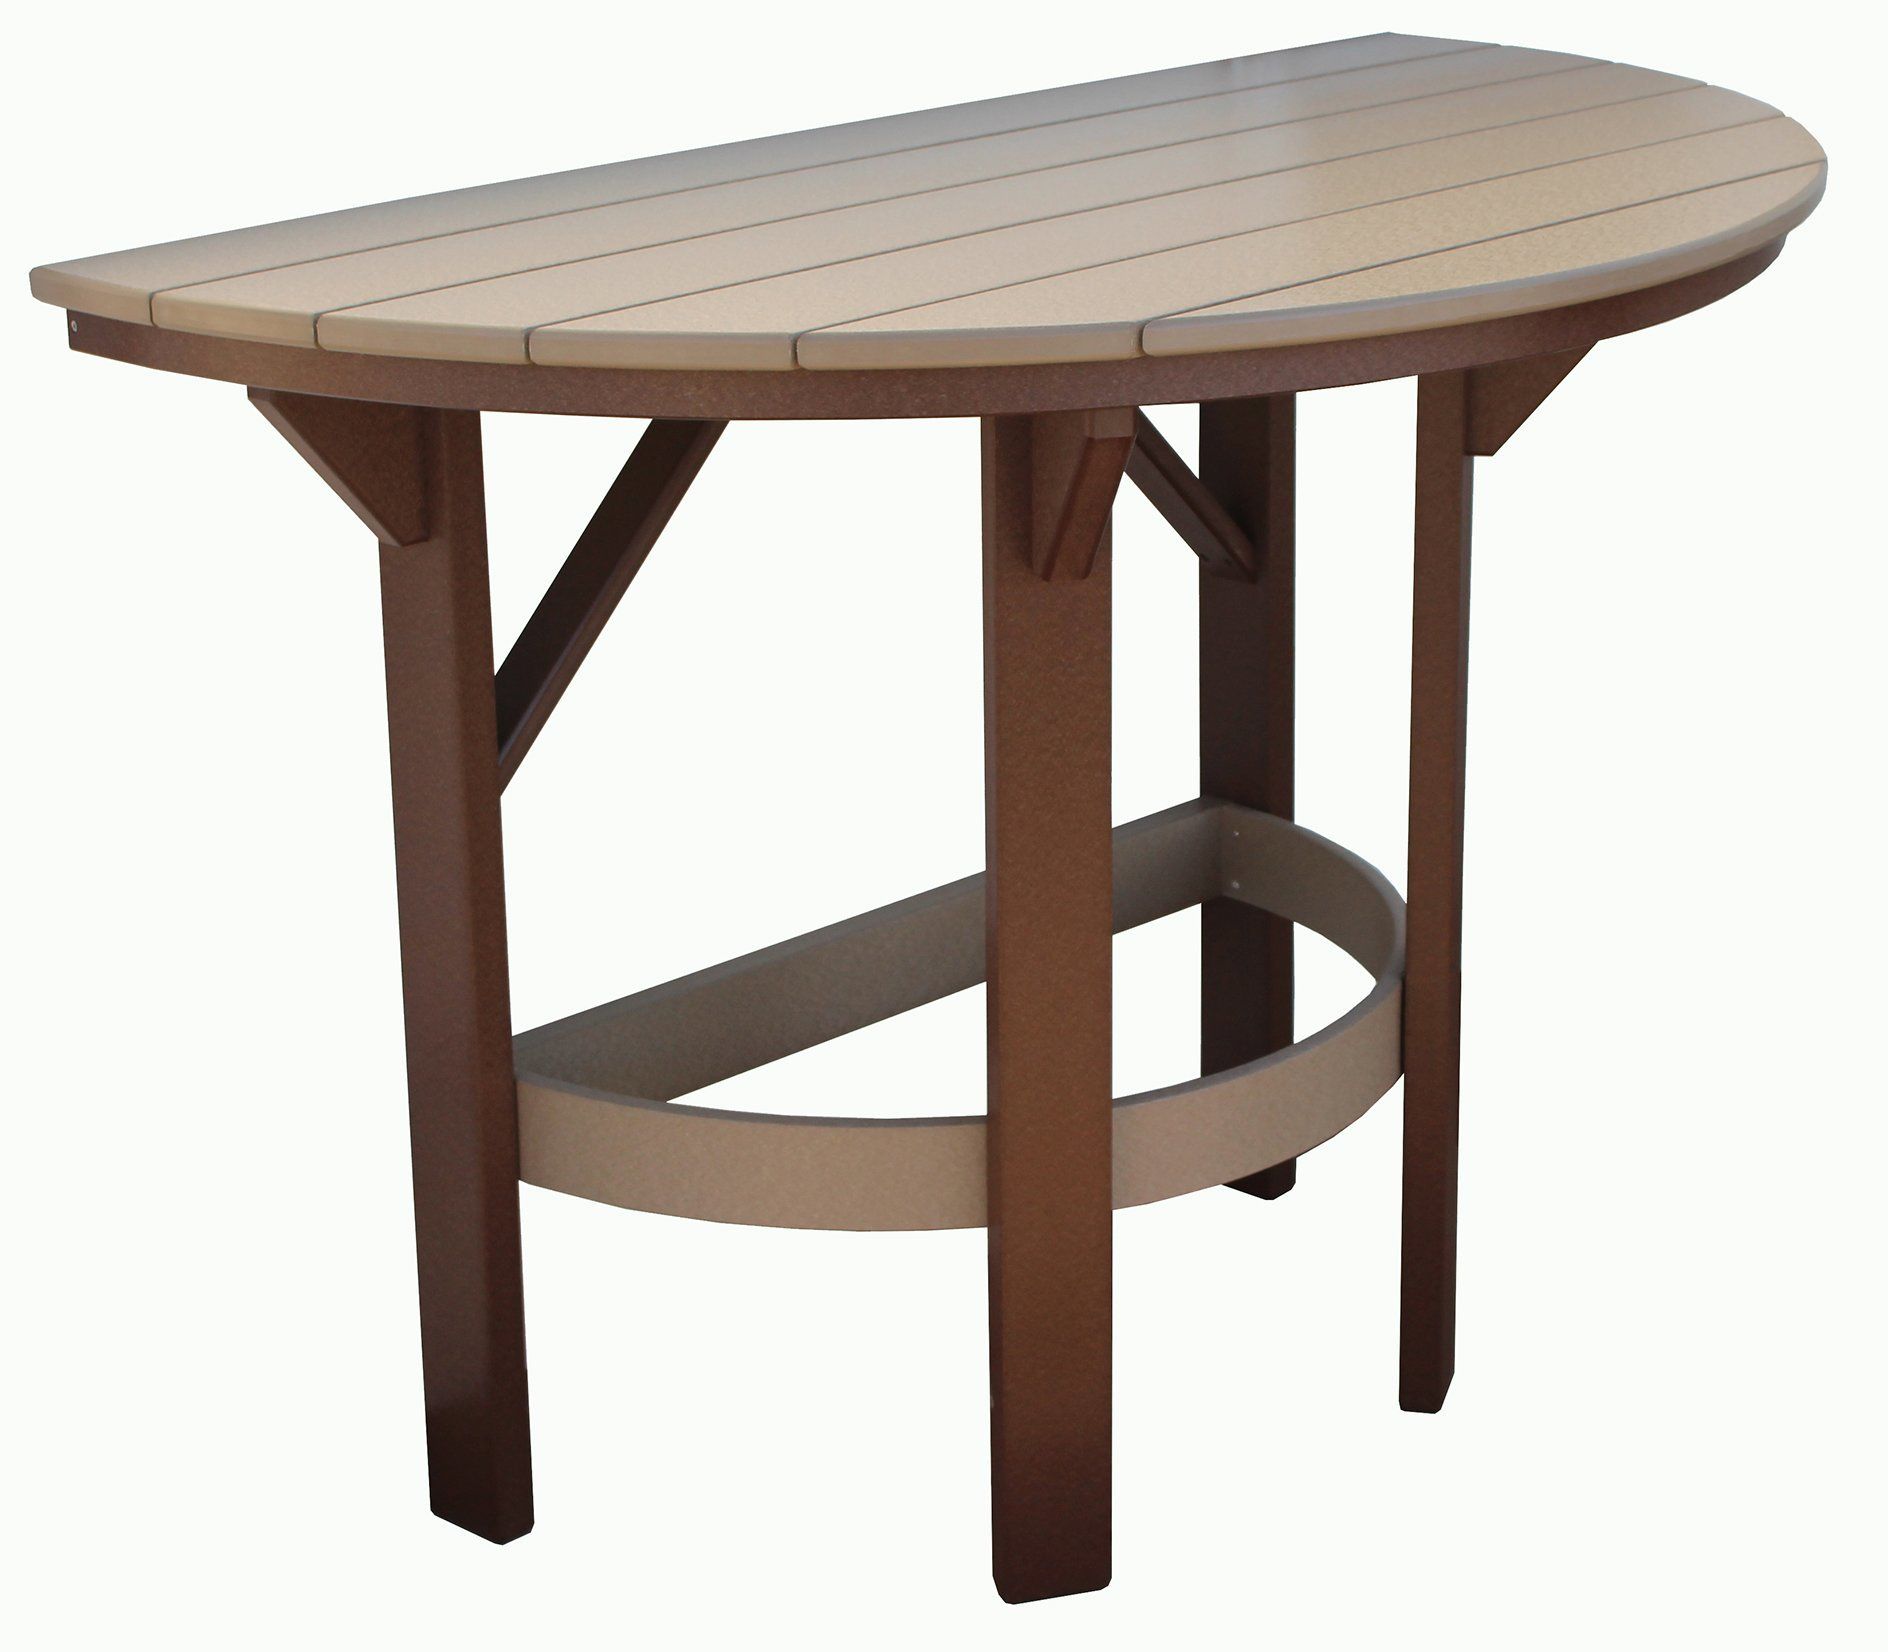 Seaside 60" Half Round Poly Dining Table From Dutchcrafters Amish Throughout Outdoor Half Round Coffee Tables (View 5 of 15)